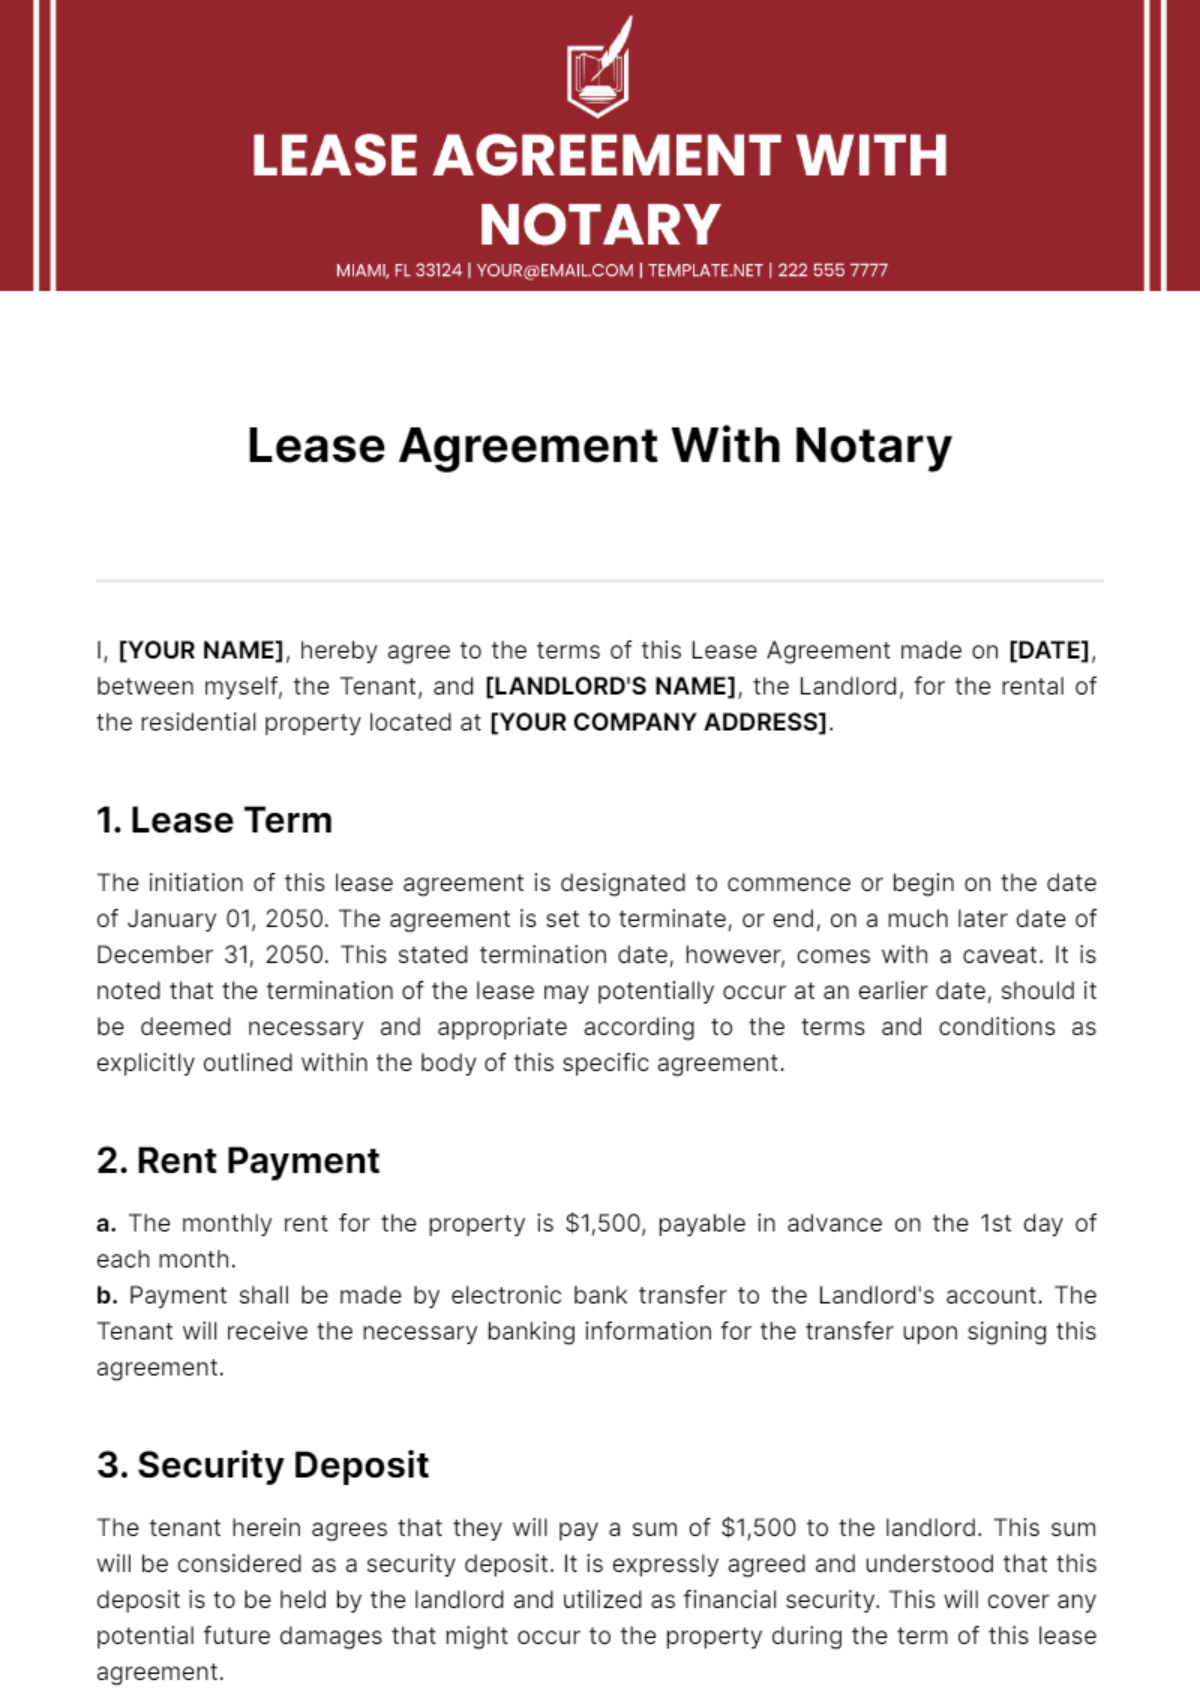 Free Lease Agreement With Notary Template